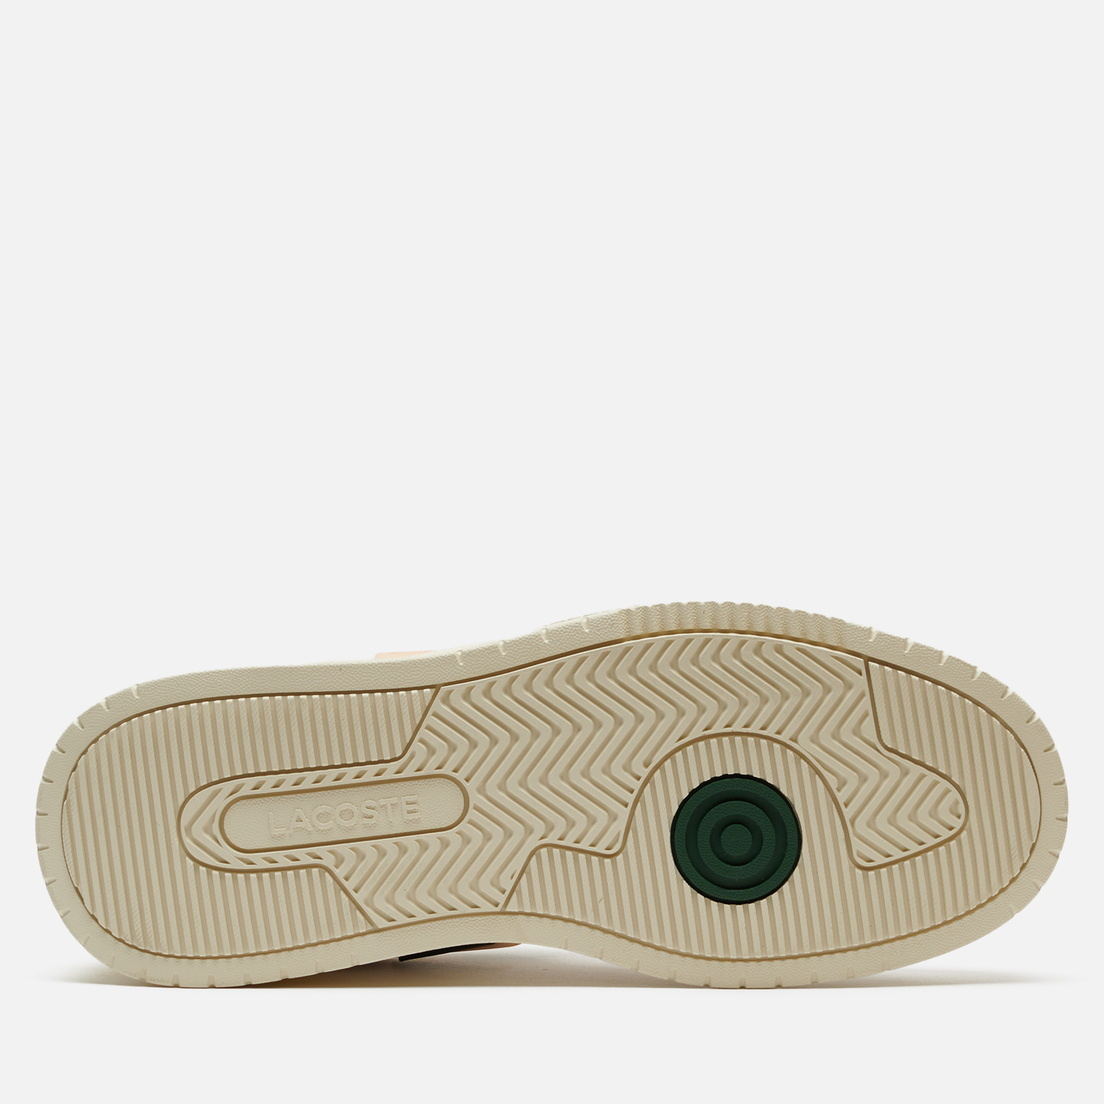 Lacoste Мужские кроссовки LT 125 Contrasted Leather